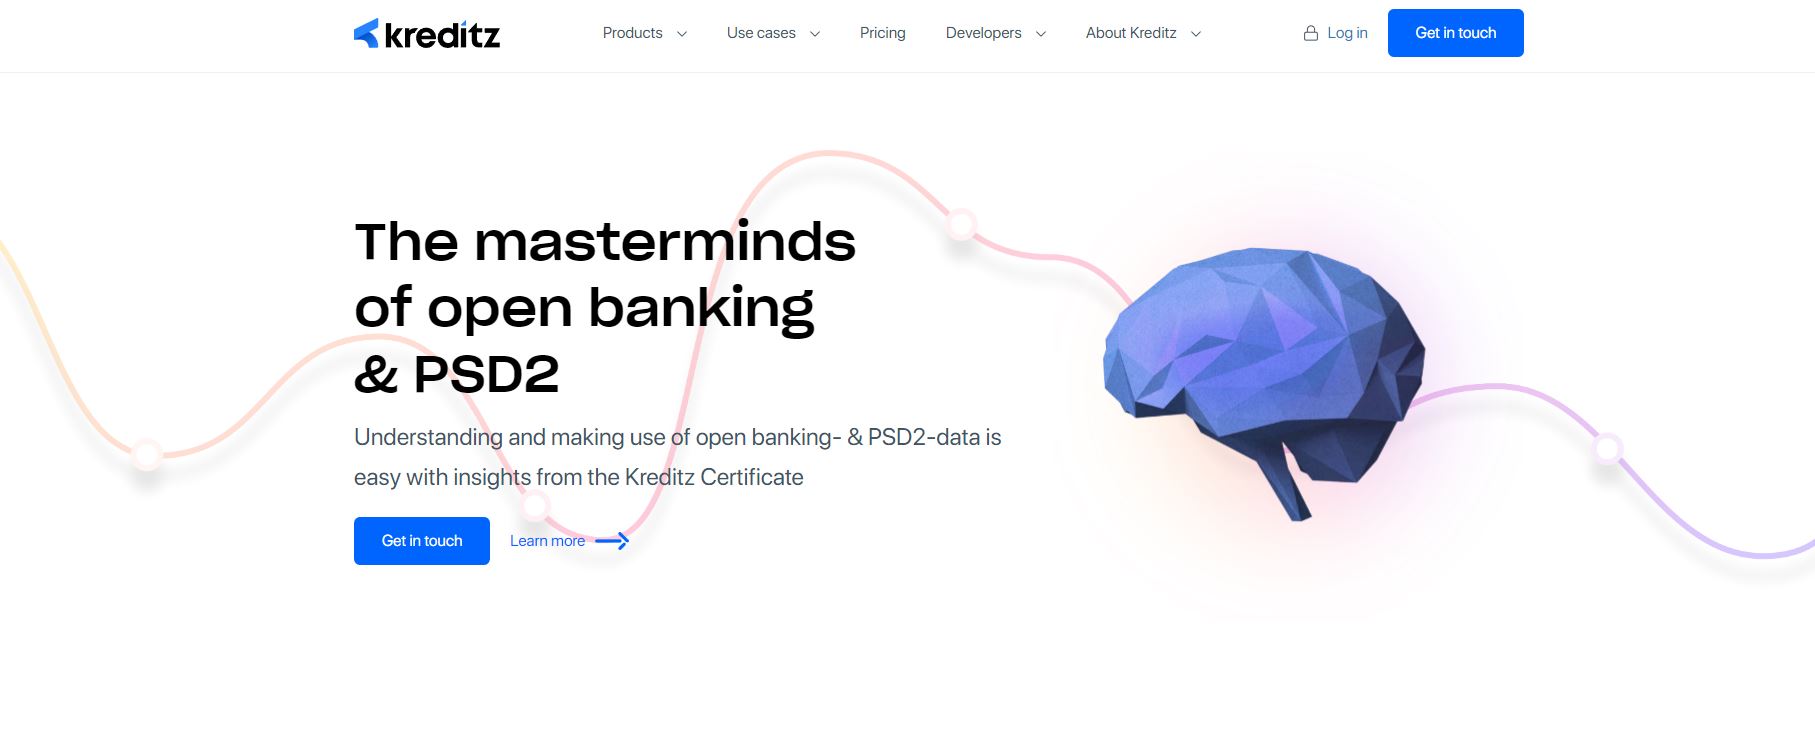 Kreditz, the innovative financial services startup that has raised $11M in funding